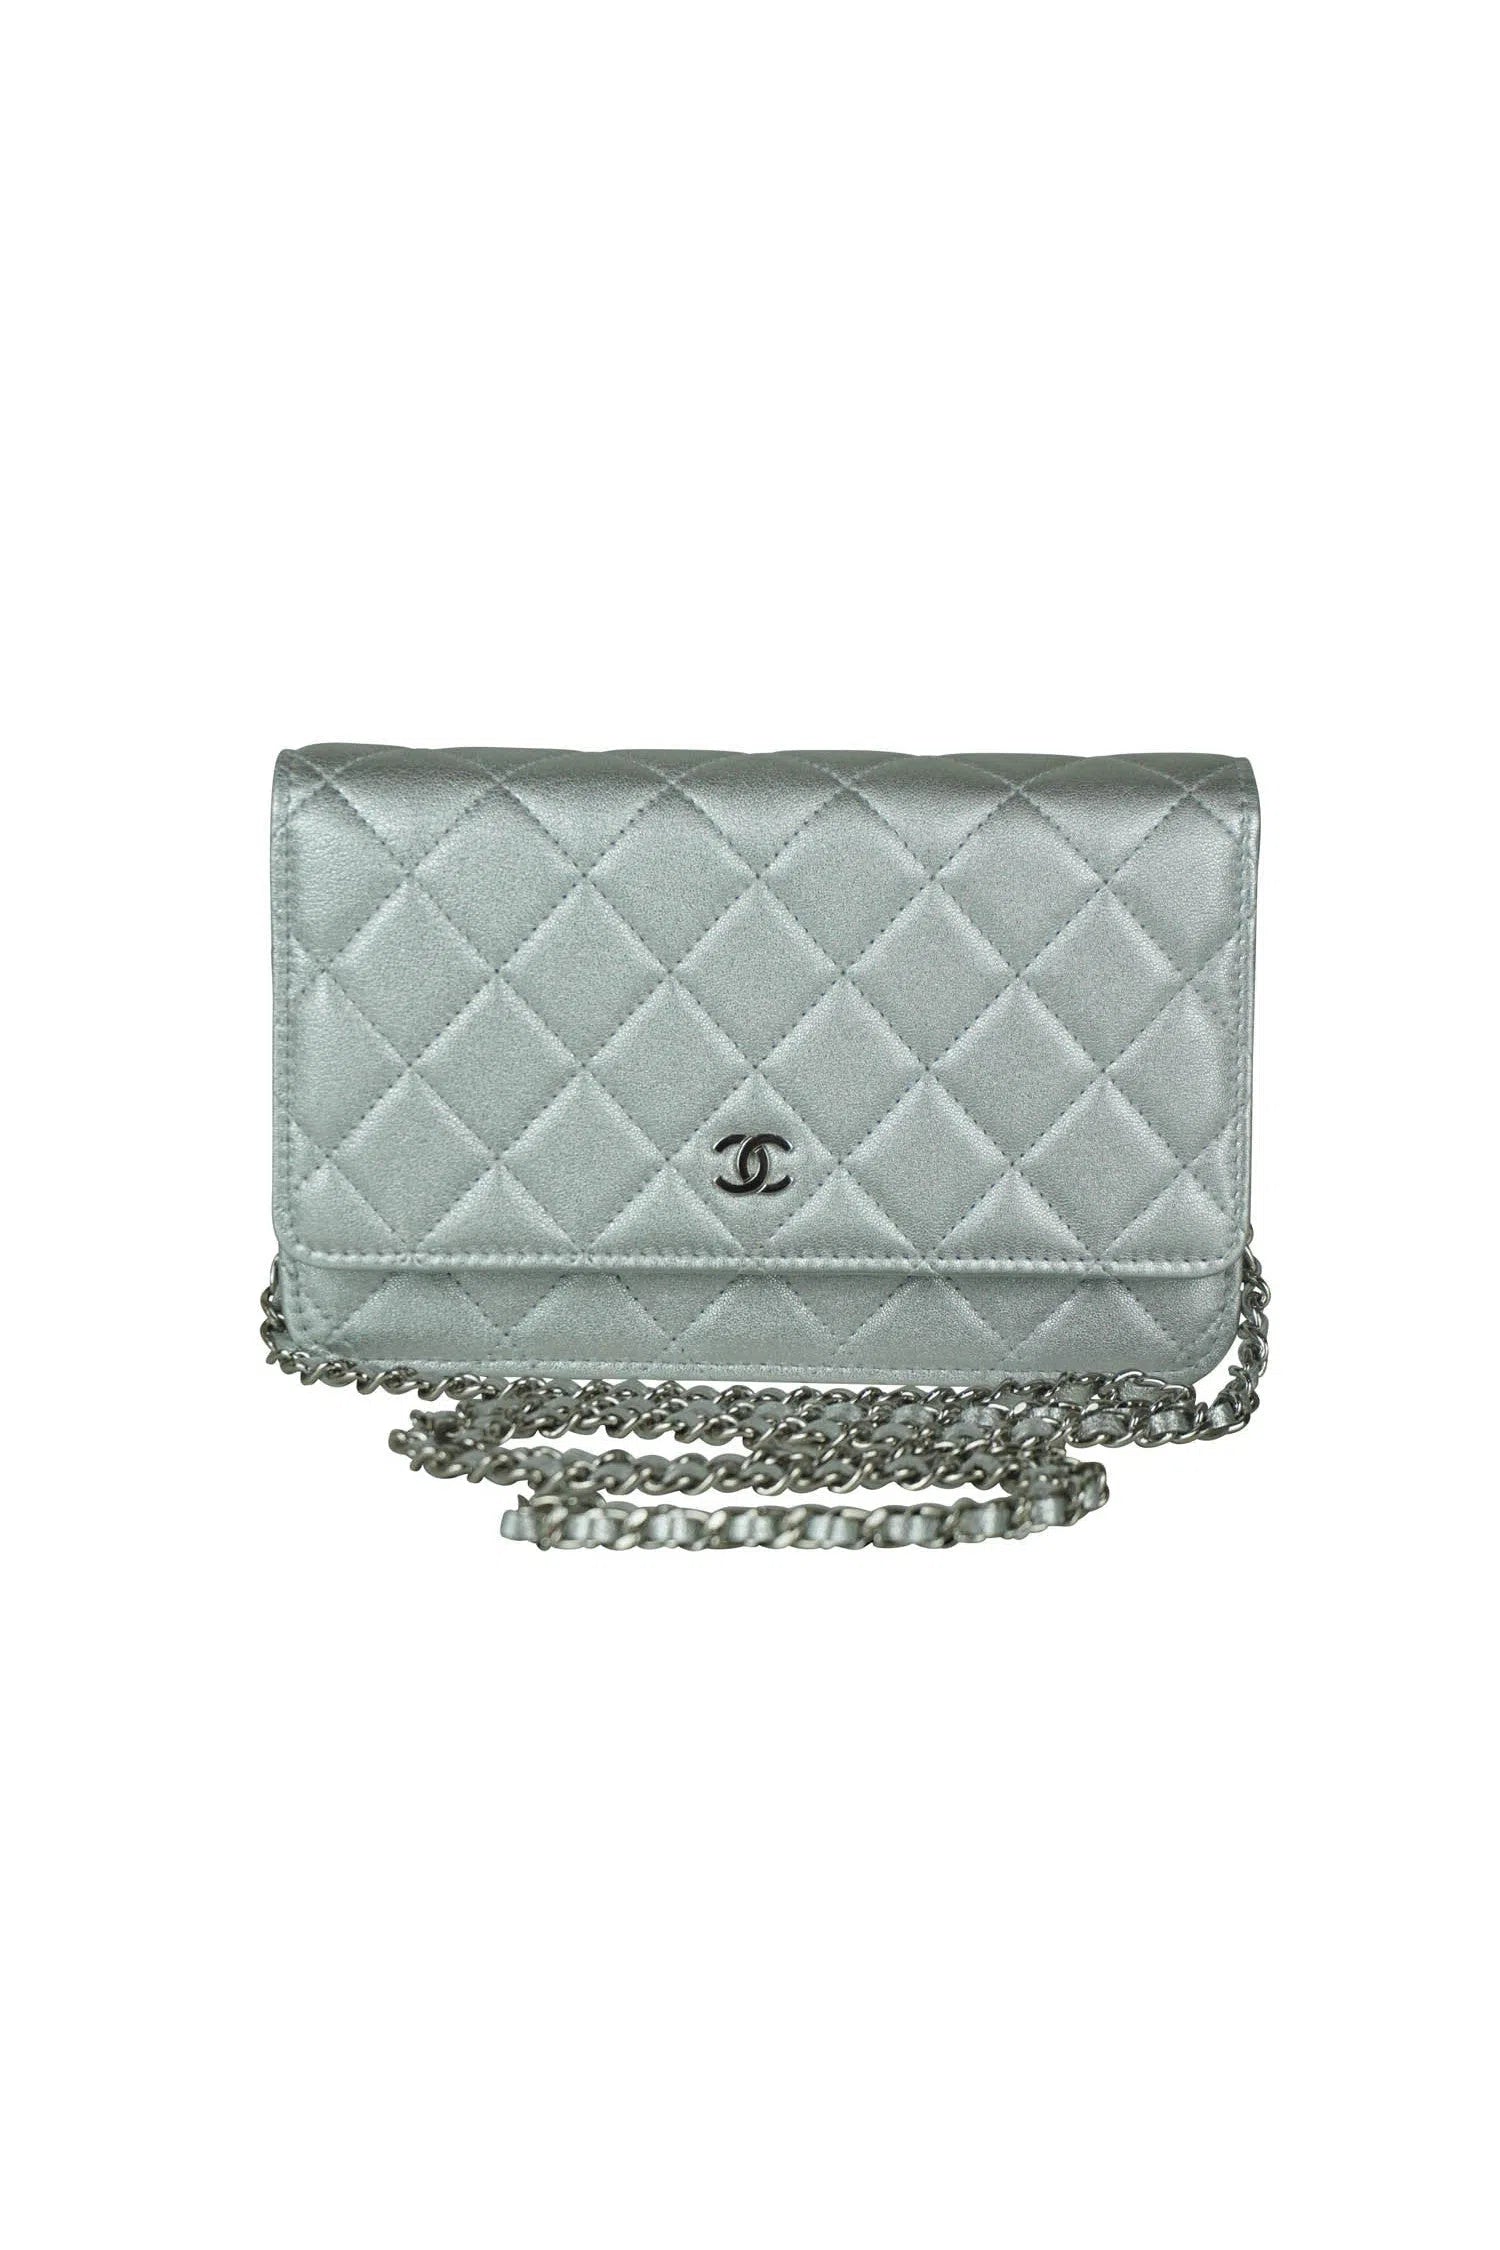 Chanel Classic Silver WOC Wallet on a Chain Purse 2021 - Foxy Couture Carmel